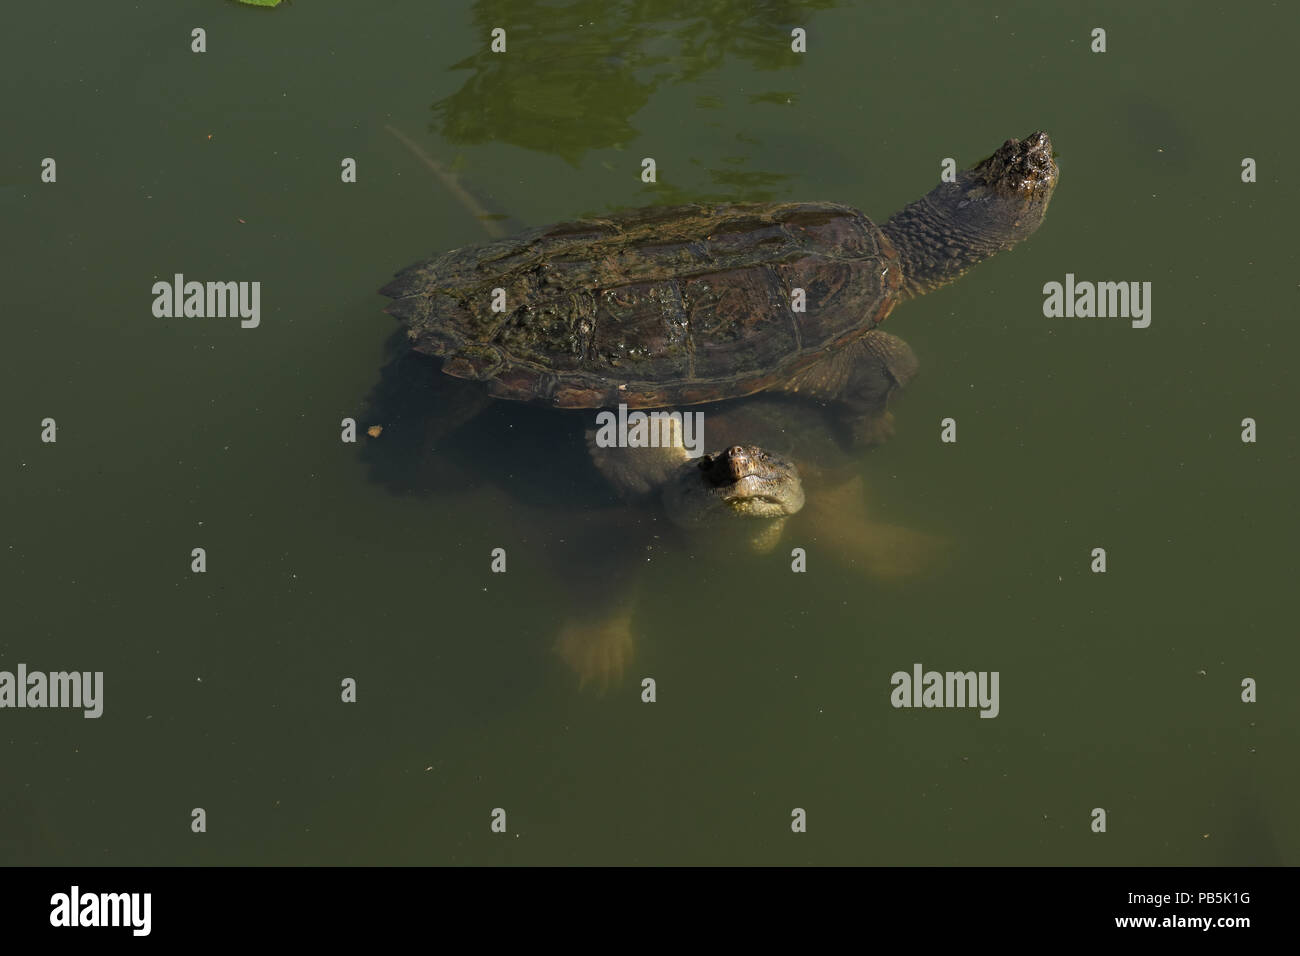 snapping turtles, Chelydra serpentina, male attempting to mate with female (and Bluegills, Lepomis macrochirus), Maryland Stock Photo